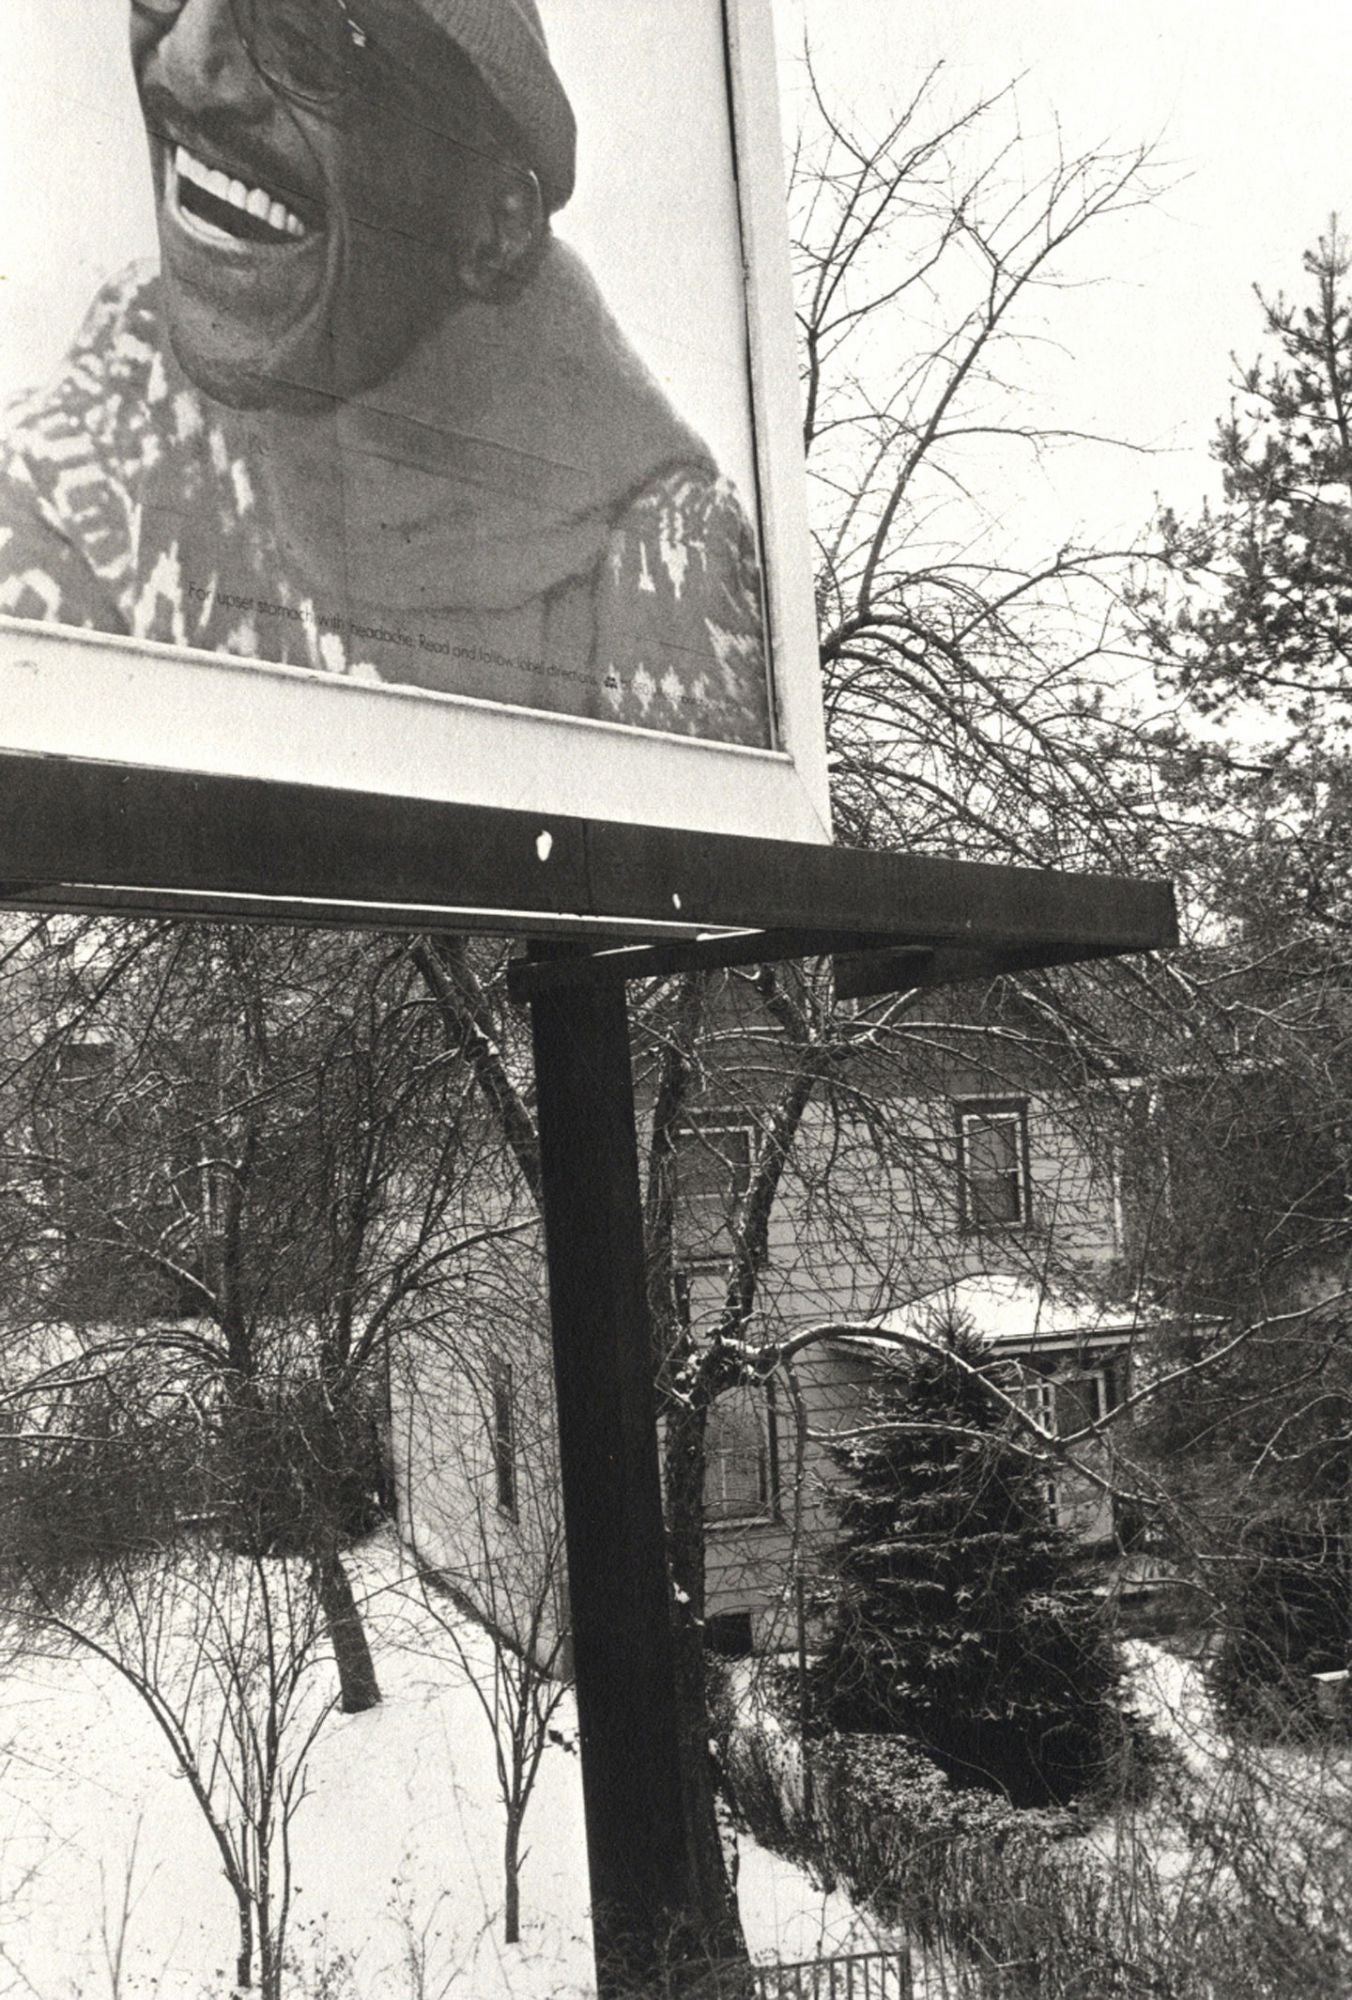 Lee Friedlander: Factory Valleys: Ohio and Pennsylvania (Special Limited Edition with One Vintage Gelatin Silver Print)